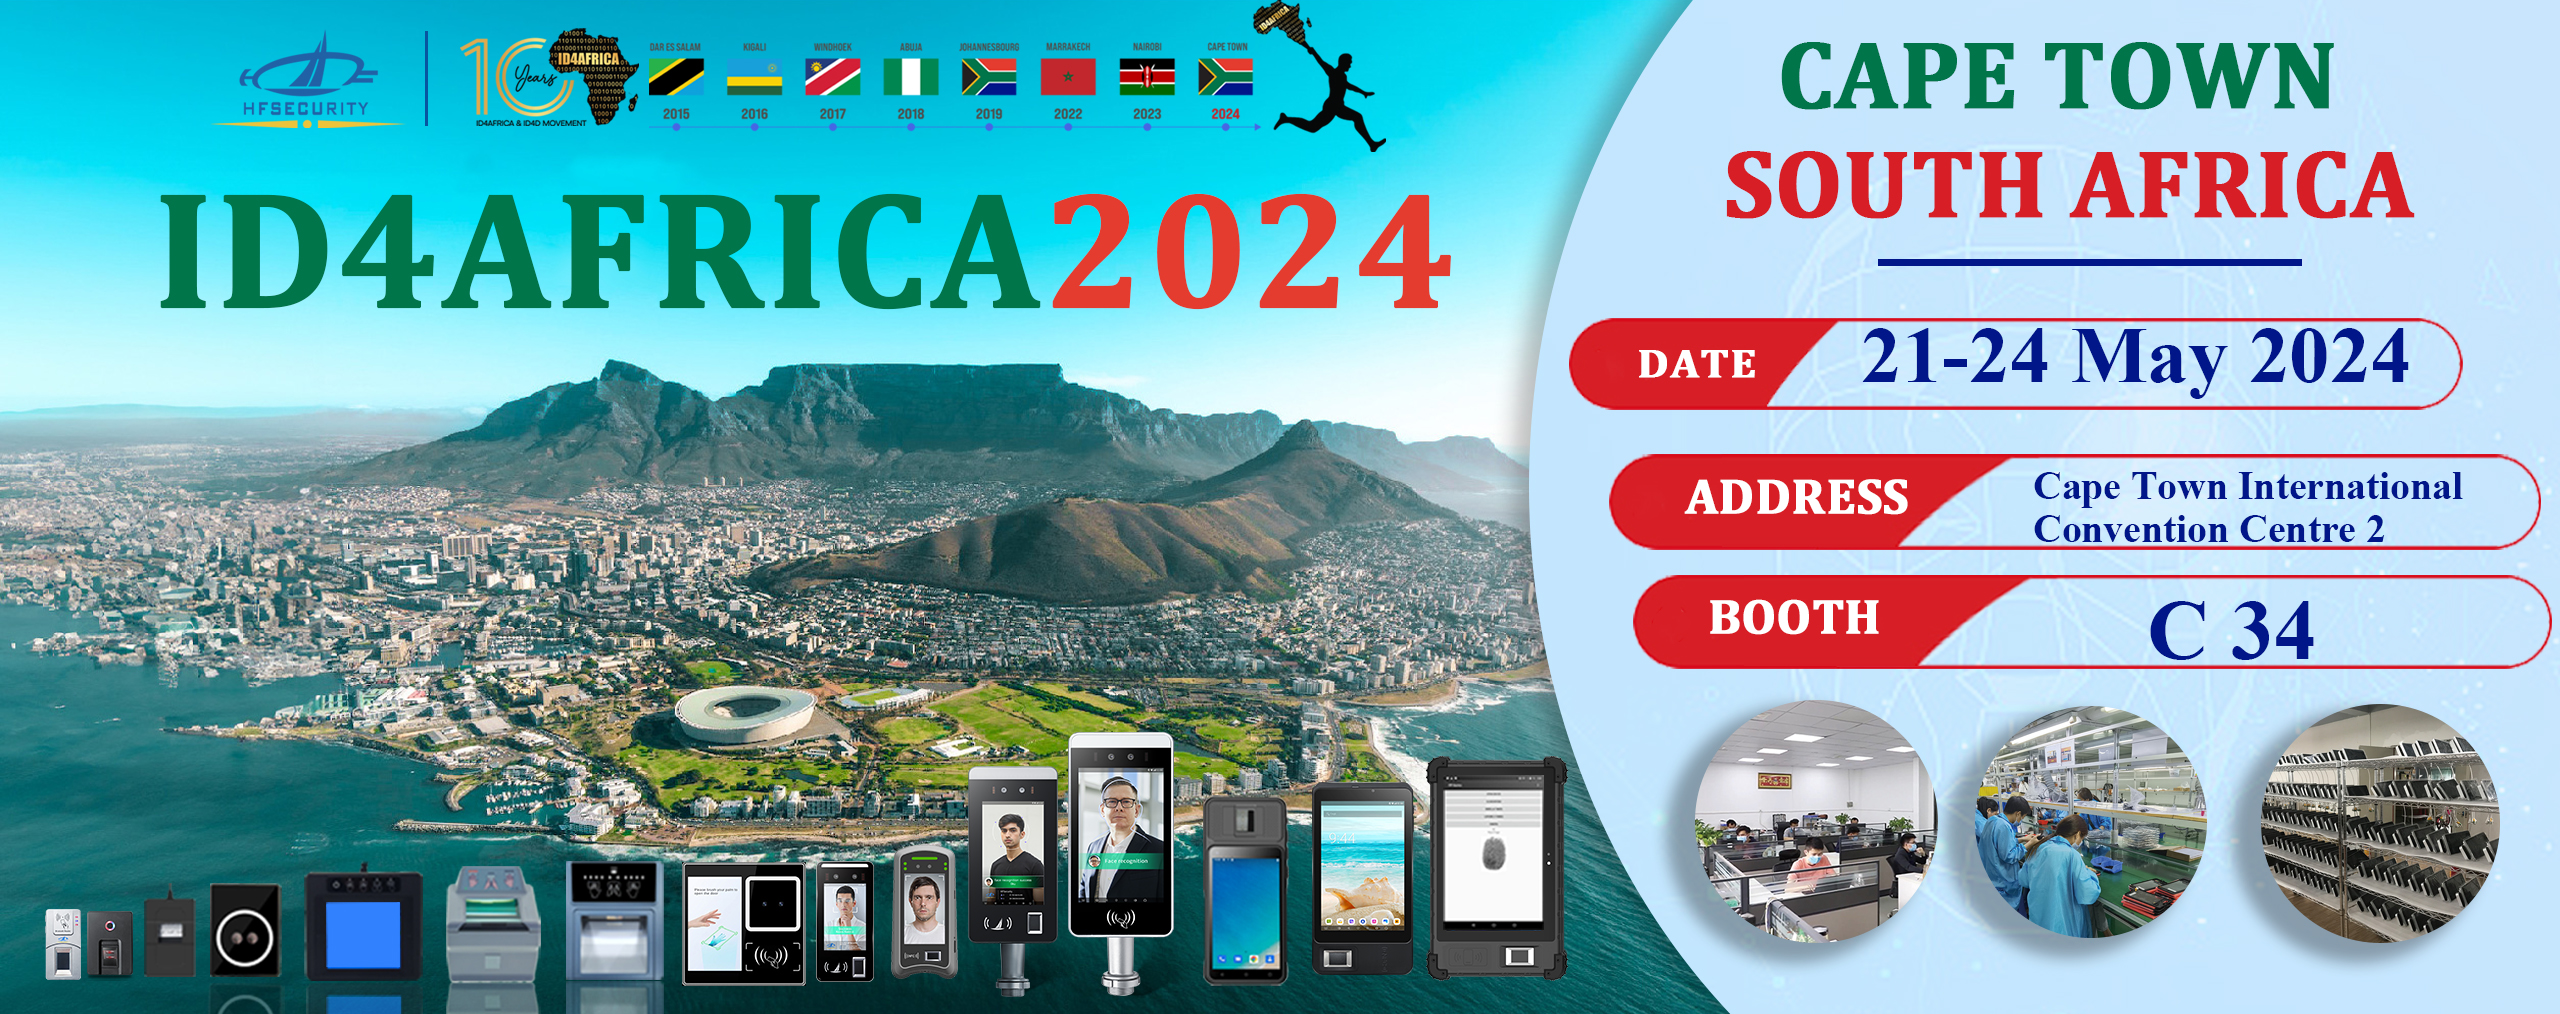 HFSecurity 2024 ID4Africa